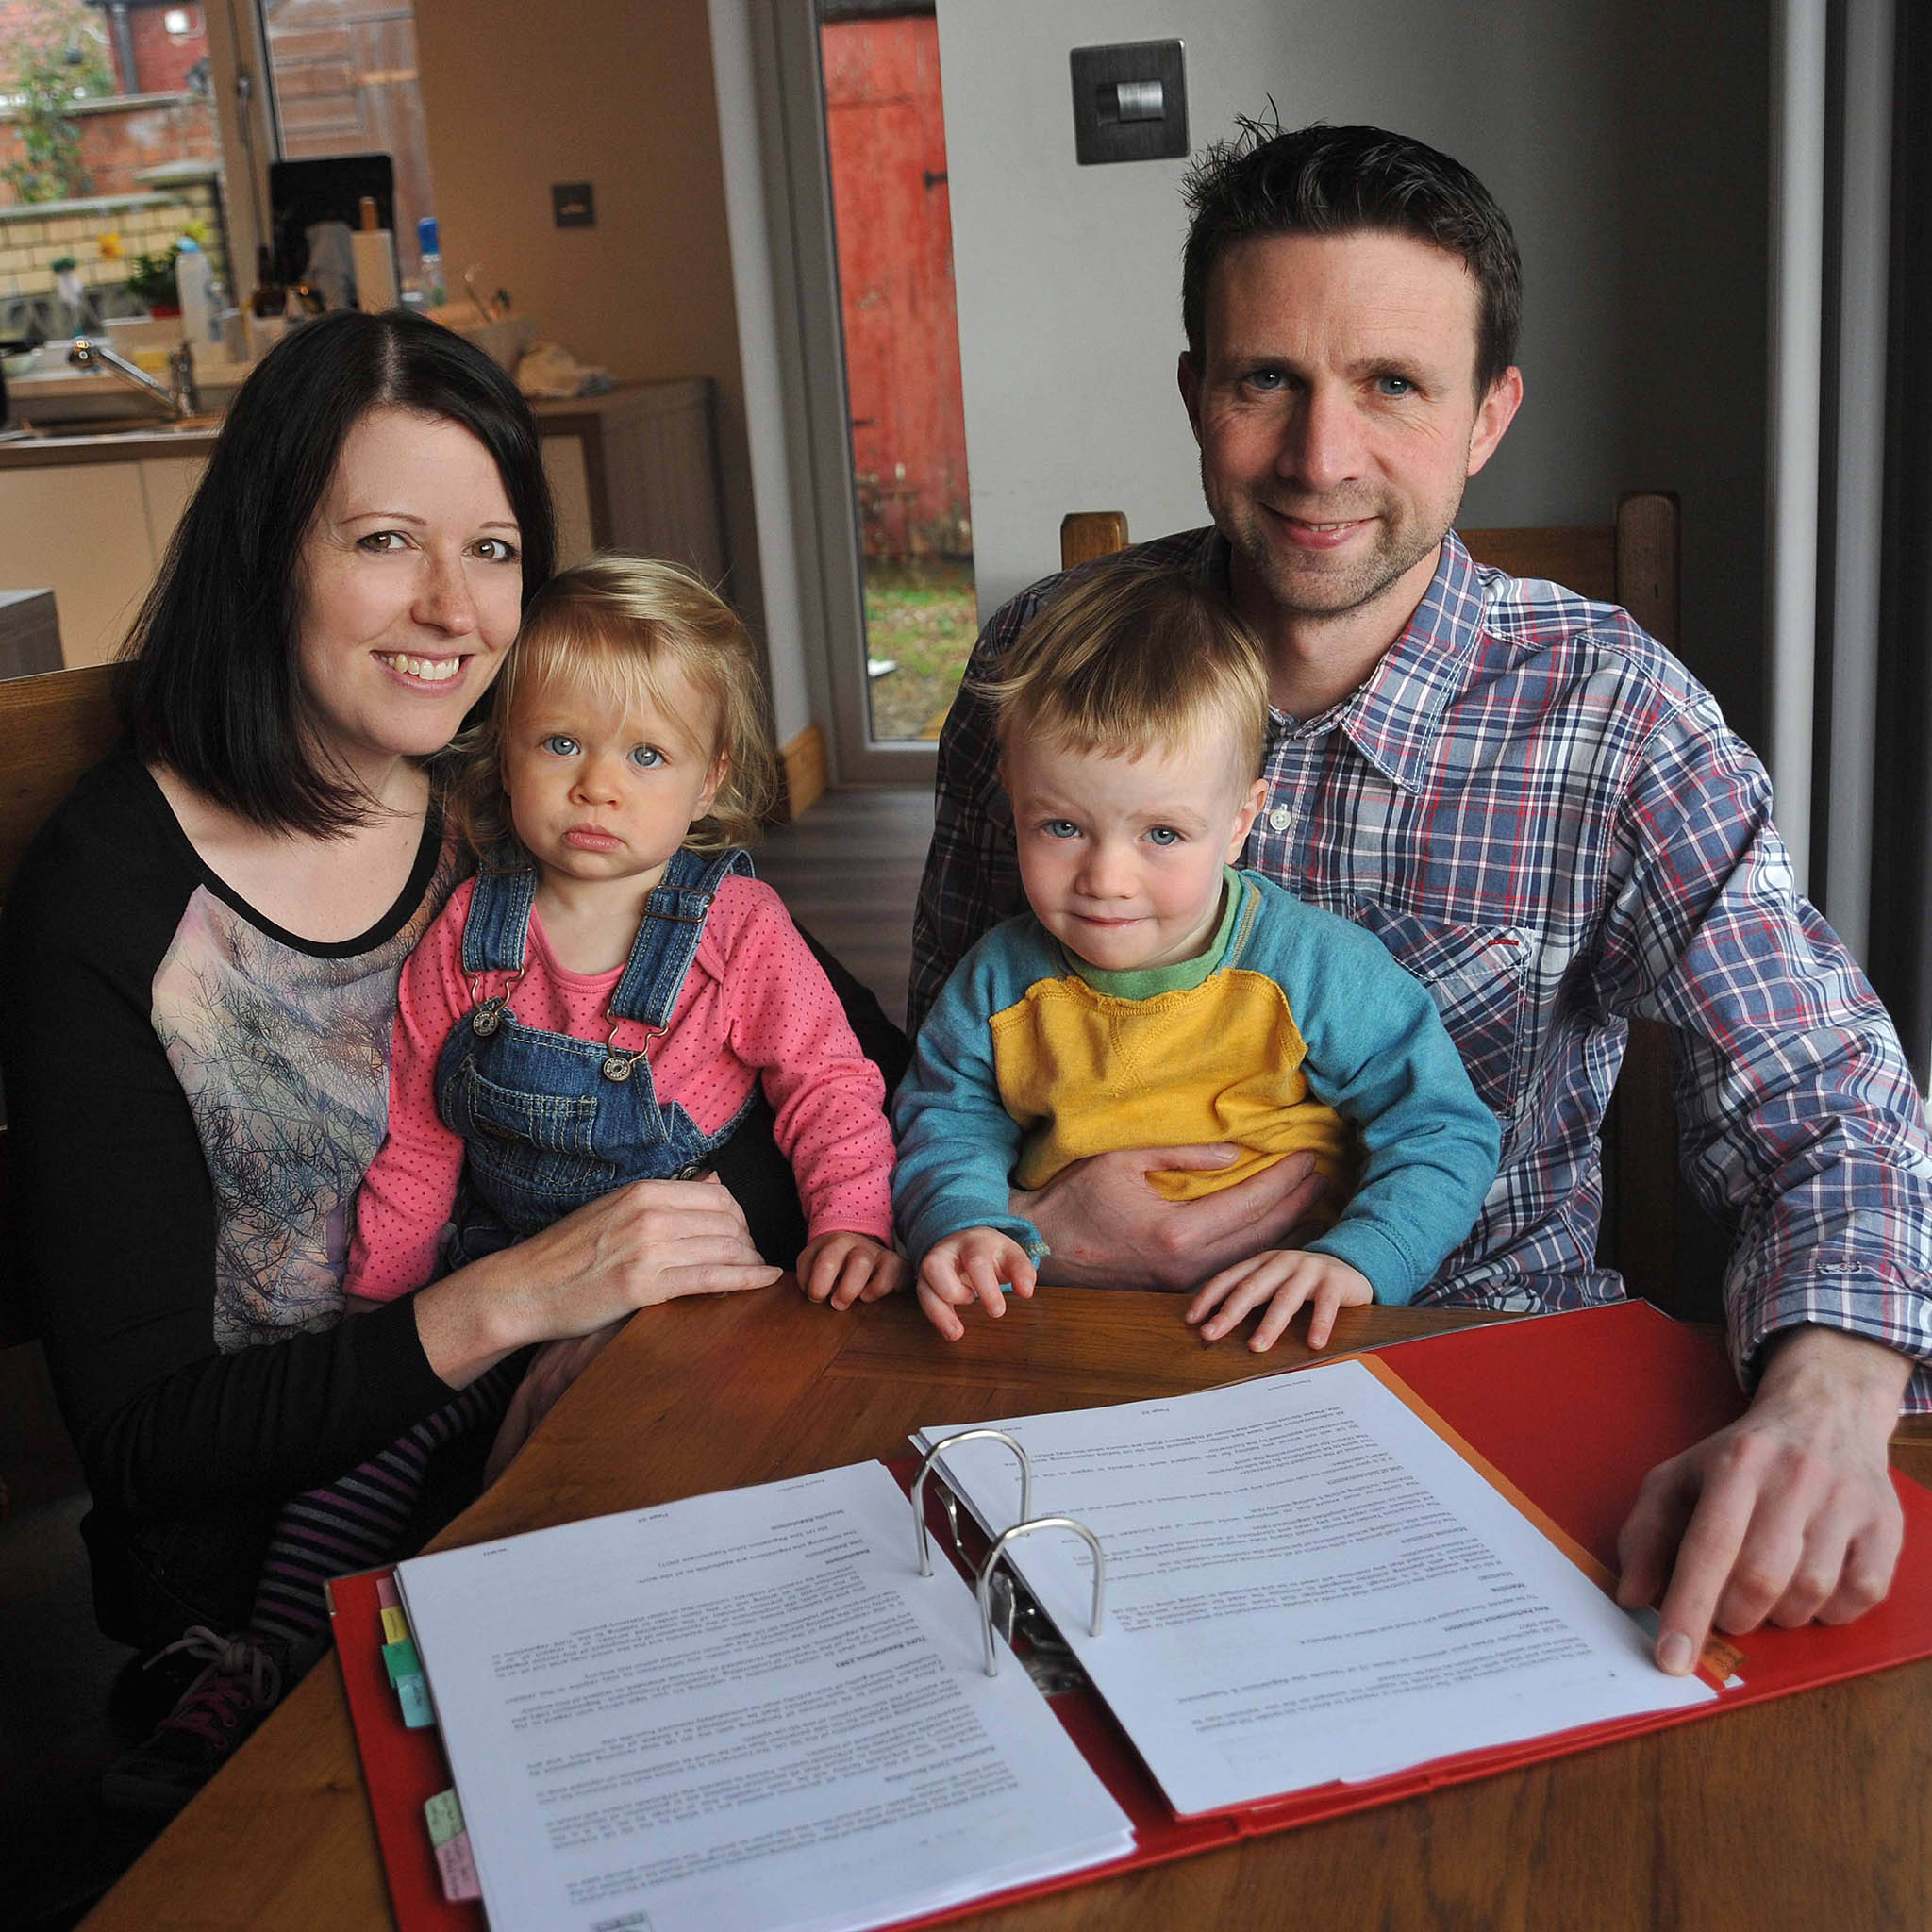 Sarah Bibby and Robert Allinson, with their children Charlotte and Ethan, confronted the ‘difficult’ questions’ posed by making a will